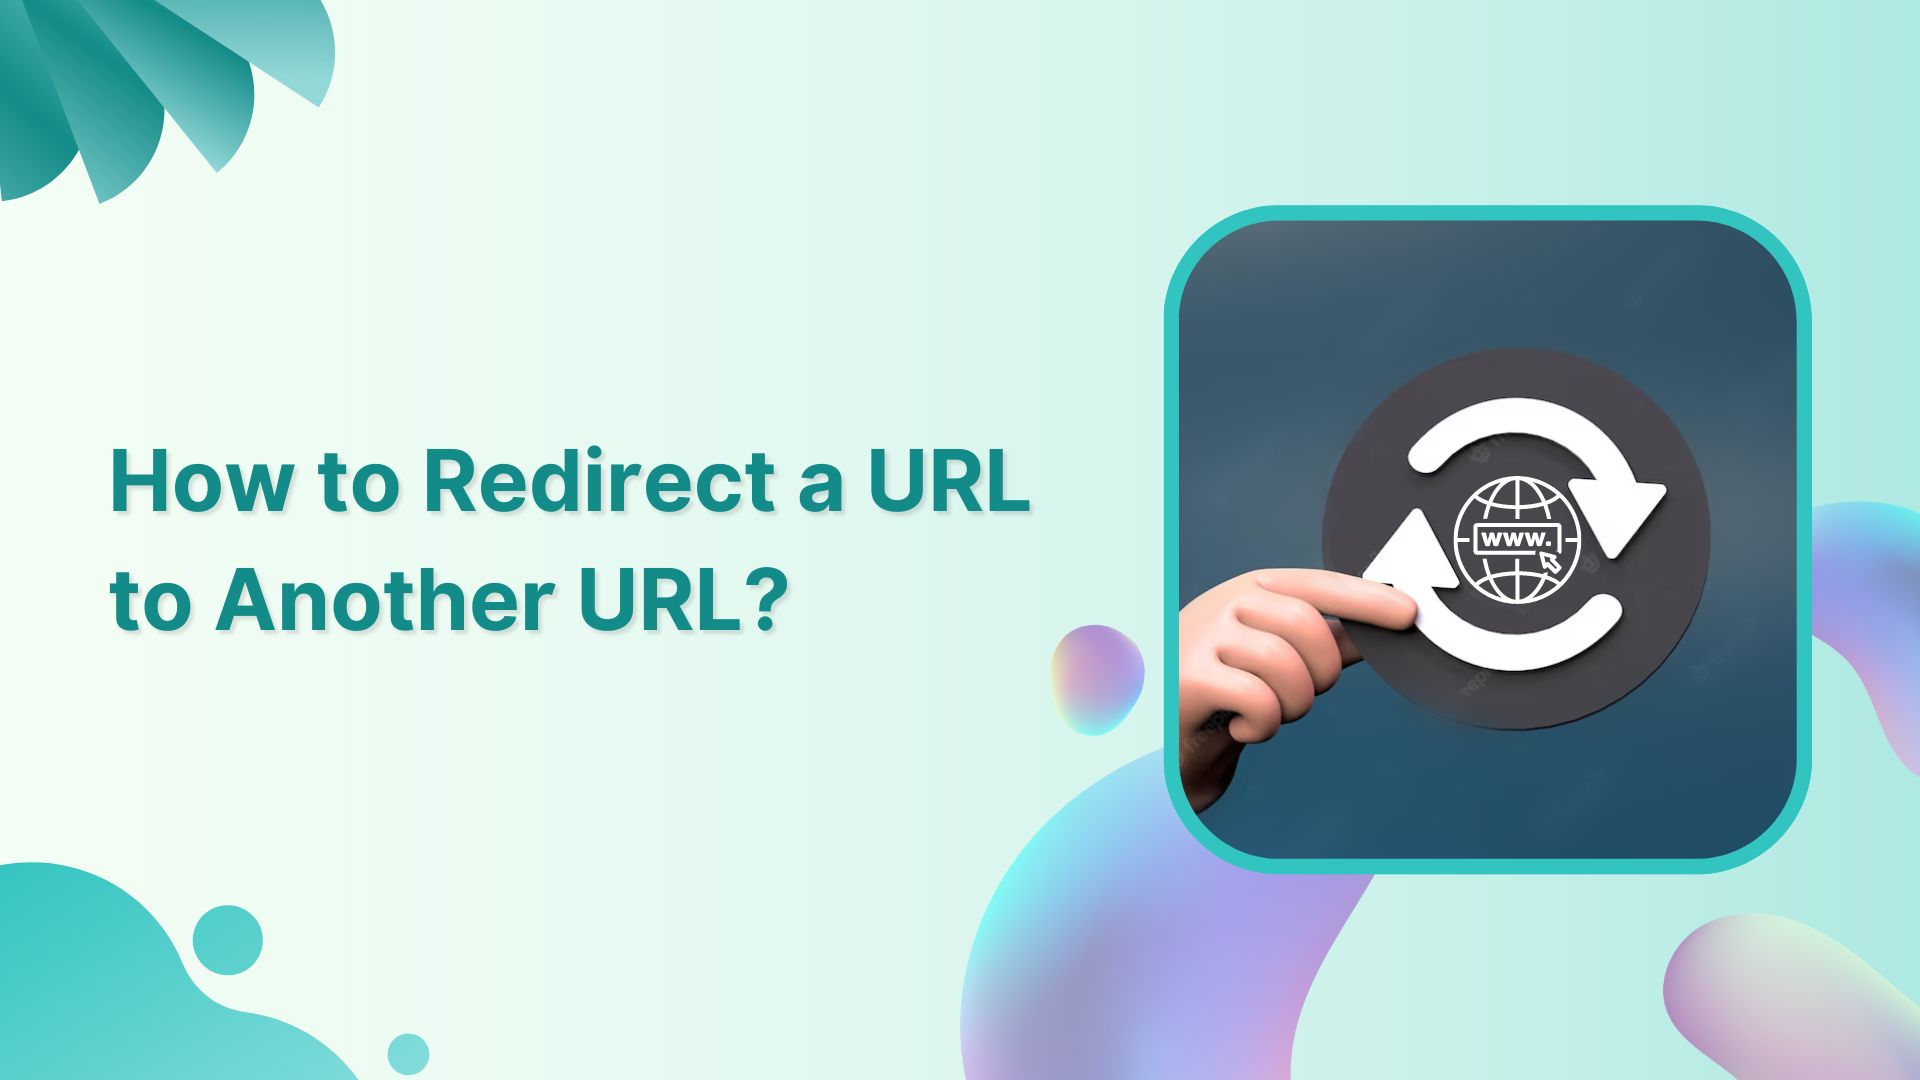 How to Redirect a URL to Another URL?